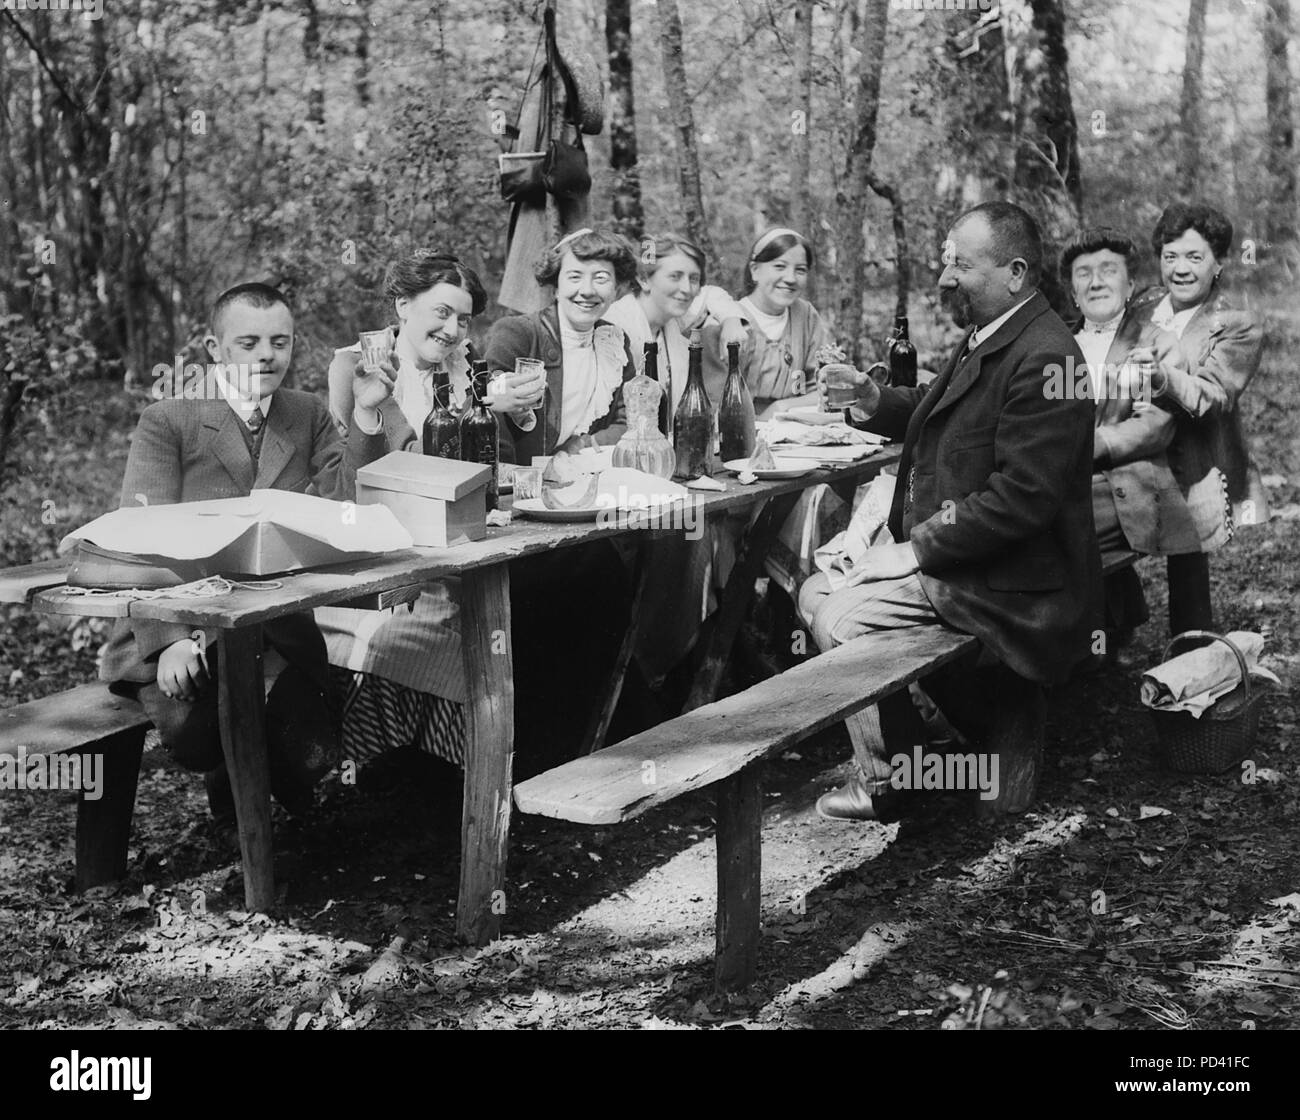 Family toasts during a picnic outside, ca. 1915. Stock Photo